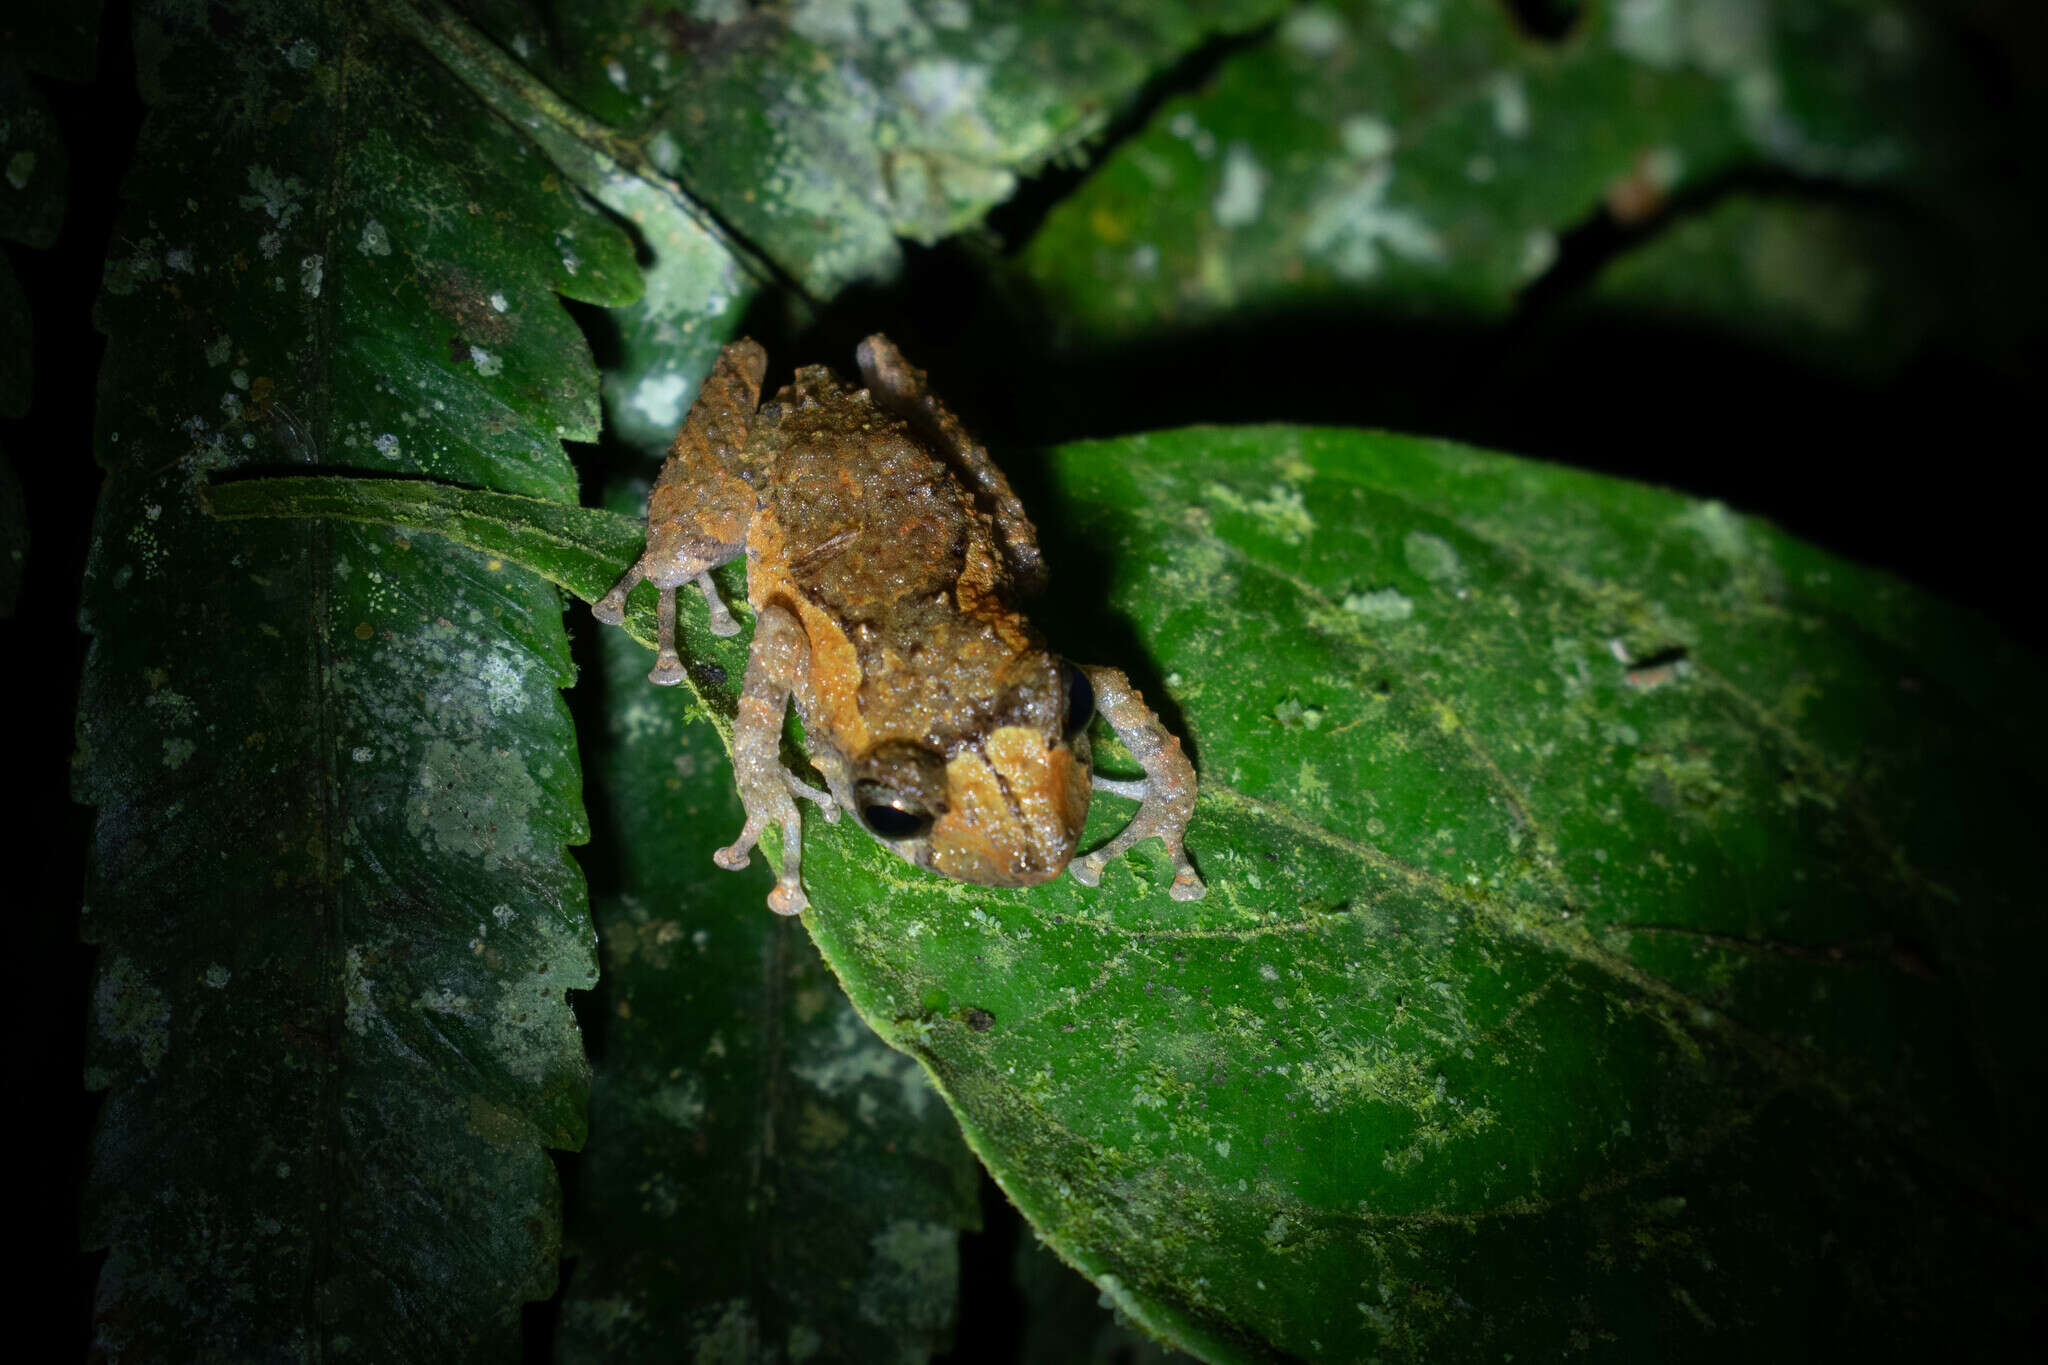 Image of white-striped robber frog